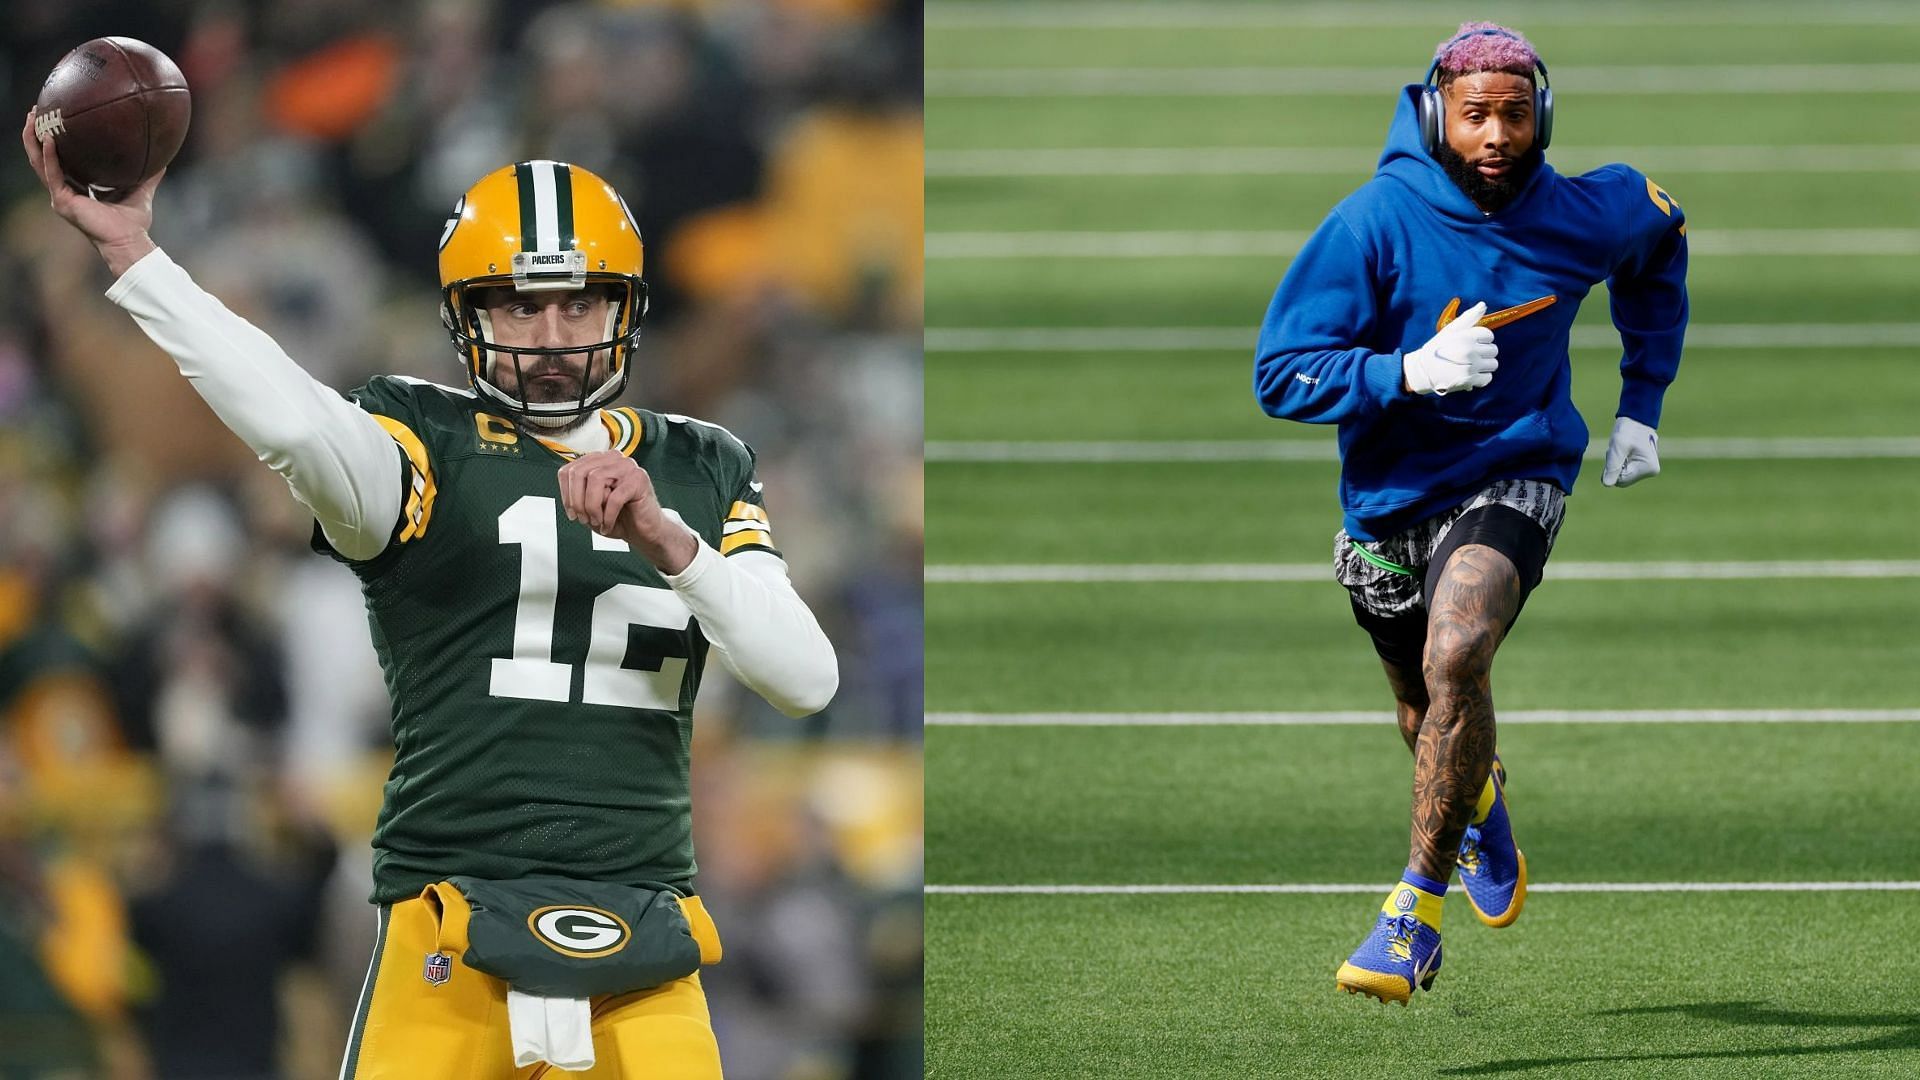 Odell has responded to being a wanted commodity by Rodgers.